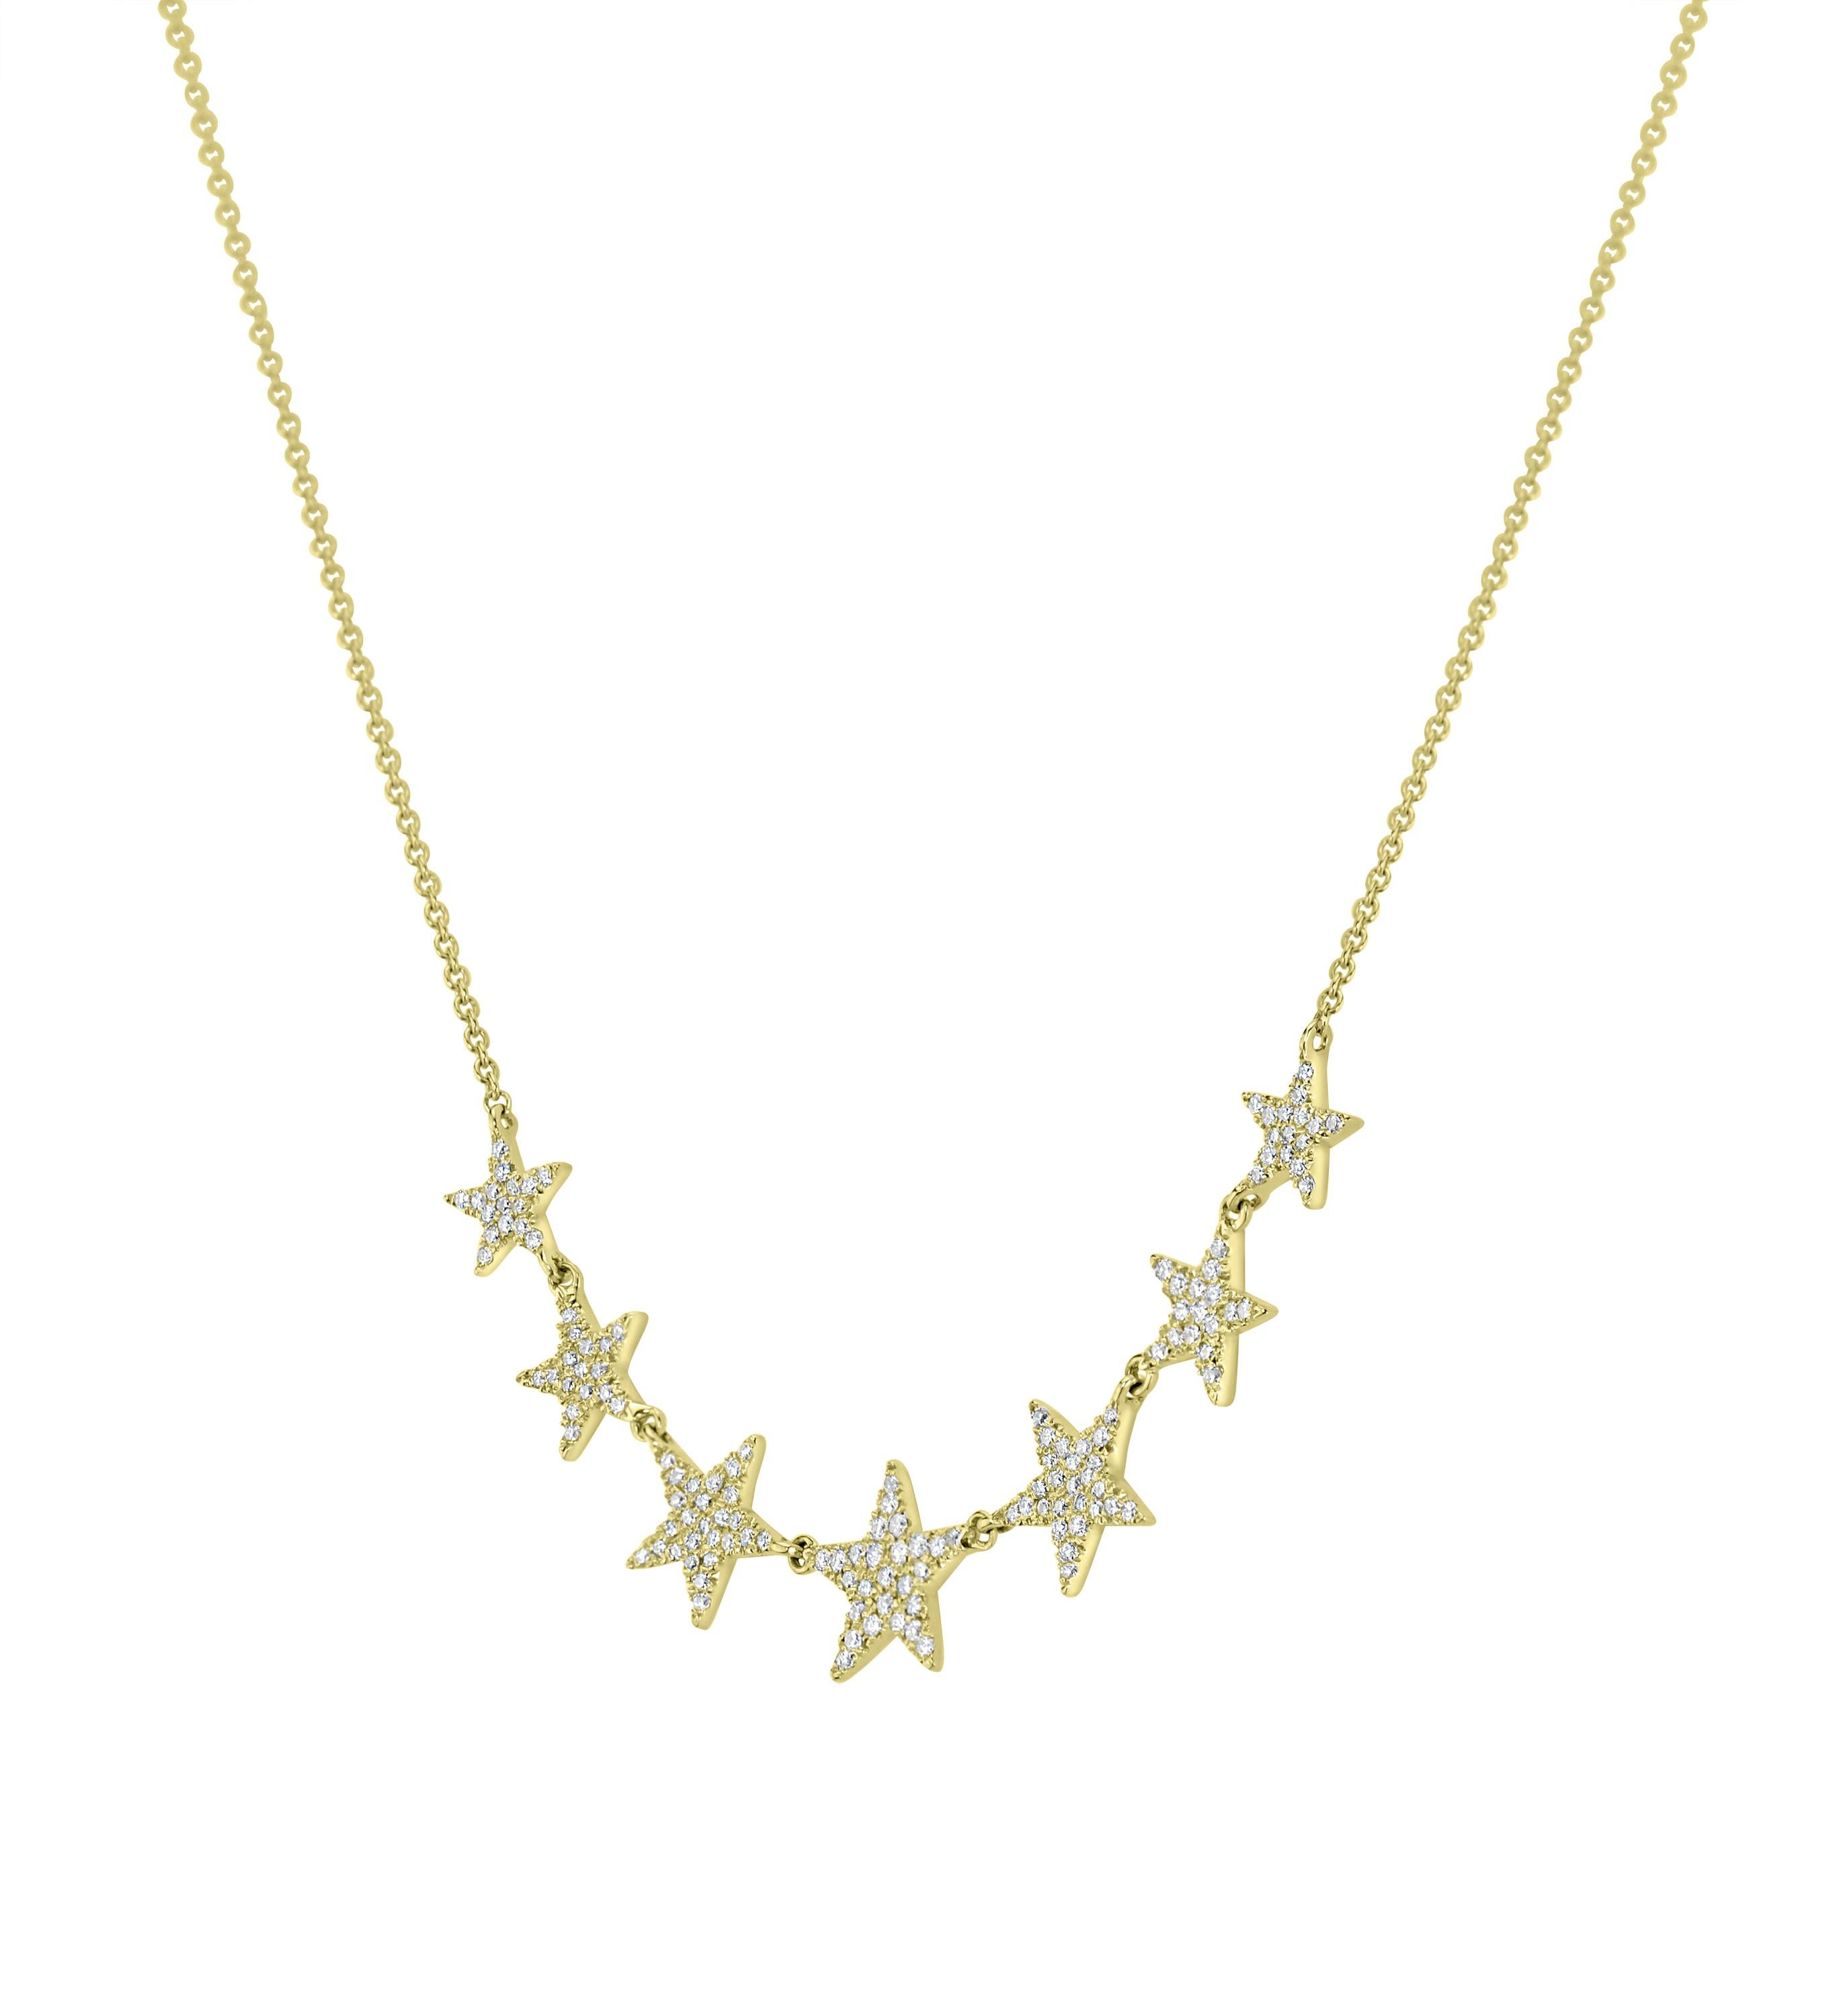 Wear your wishes around your neck with this charming star necklace by Luxle. It is made of 136 round diamonds on pave. It comes with a lobster clasp and the hanging length is 15 inches.

Please follow the Luxury Jewels storefront to view the latest